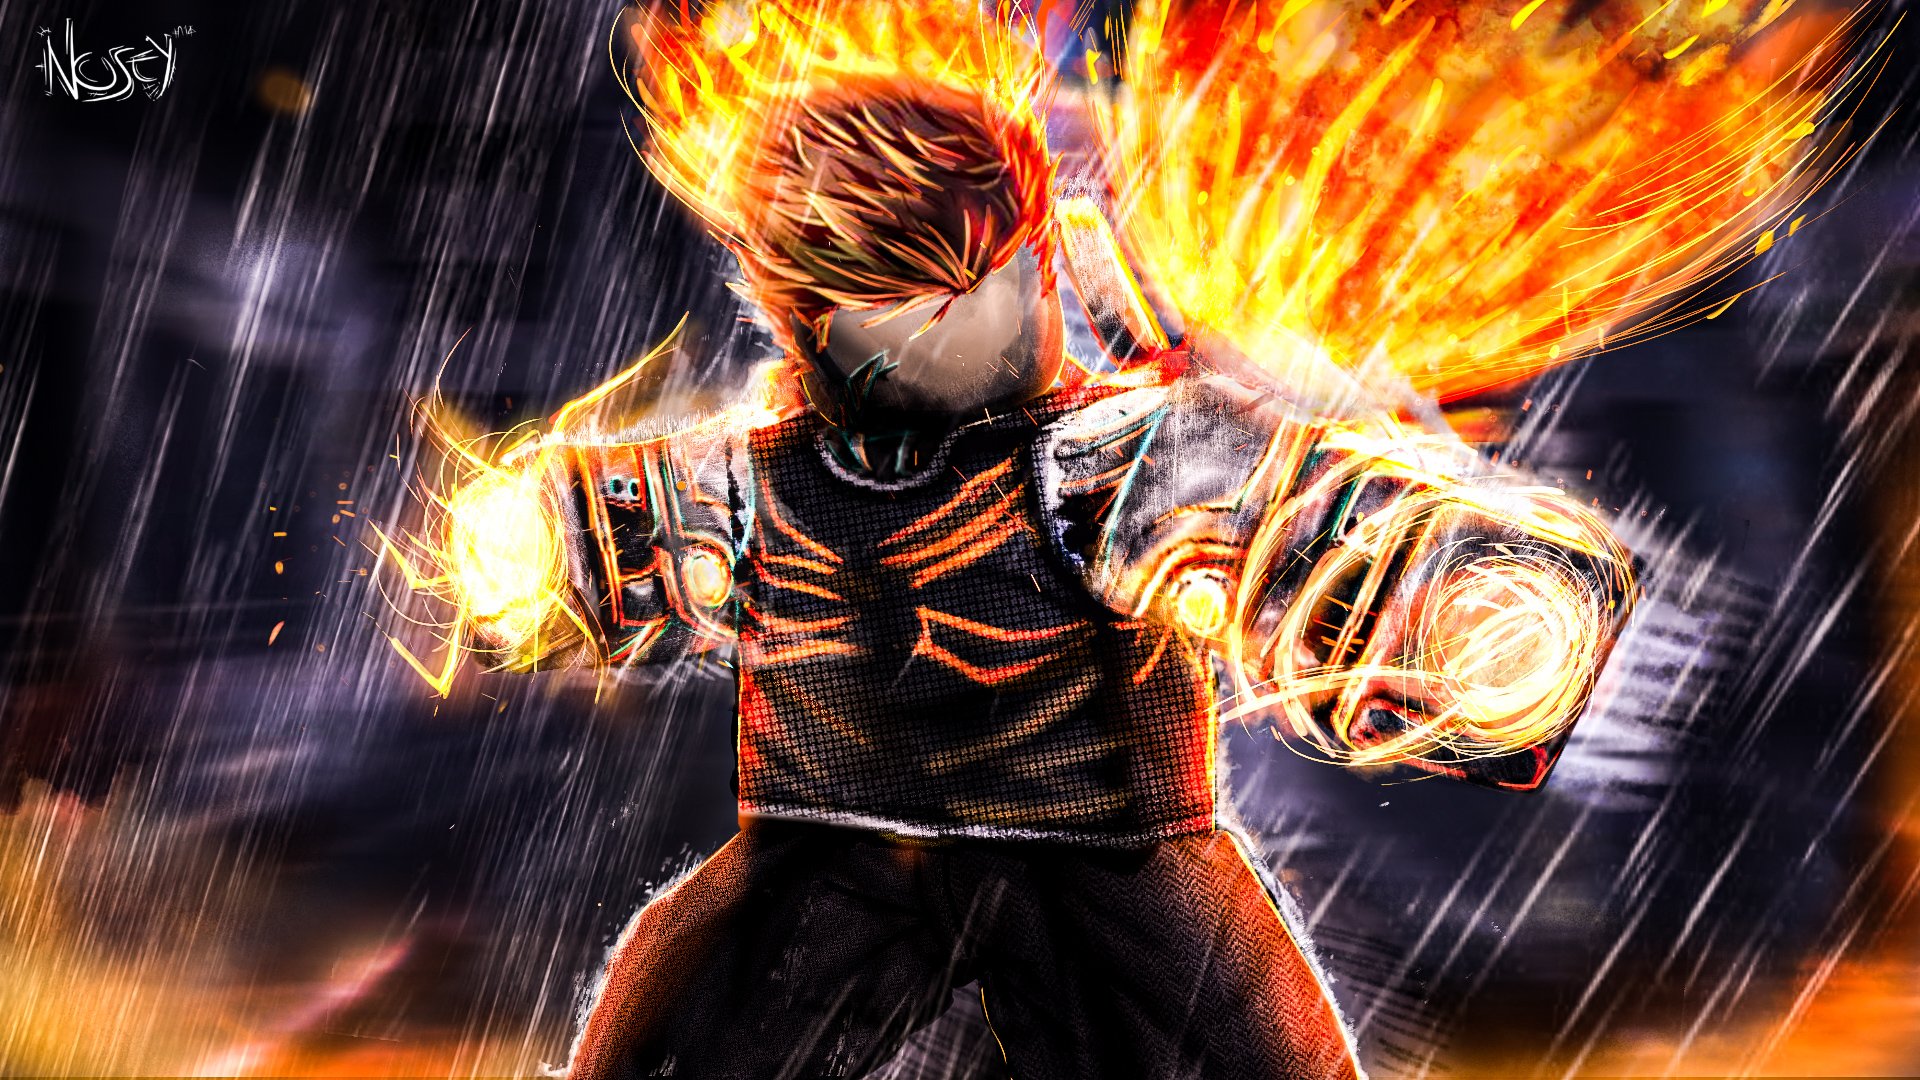 Noser Back To Grind On Twitter Genos Of One Punch Man Opm Gfx I Fell Bad For Hair Guys I Don T Have Rig But I Hope You Like It - one punch man roblox